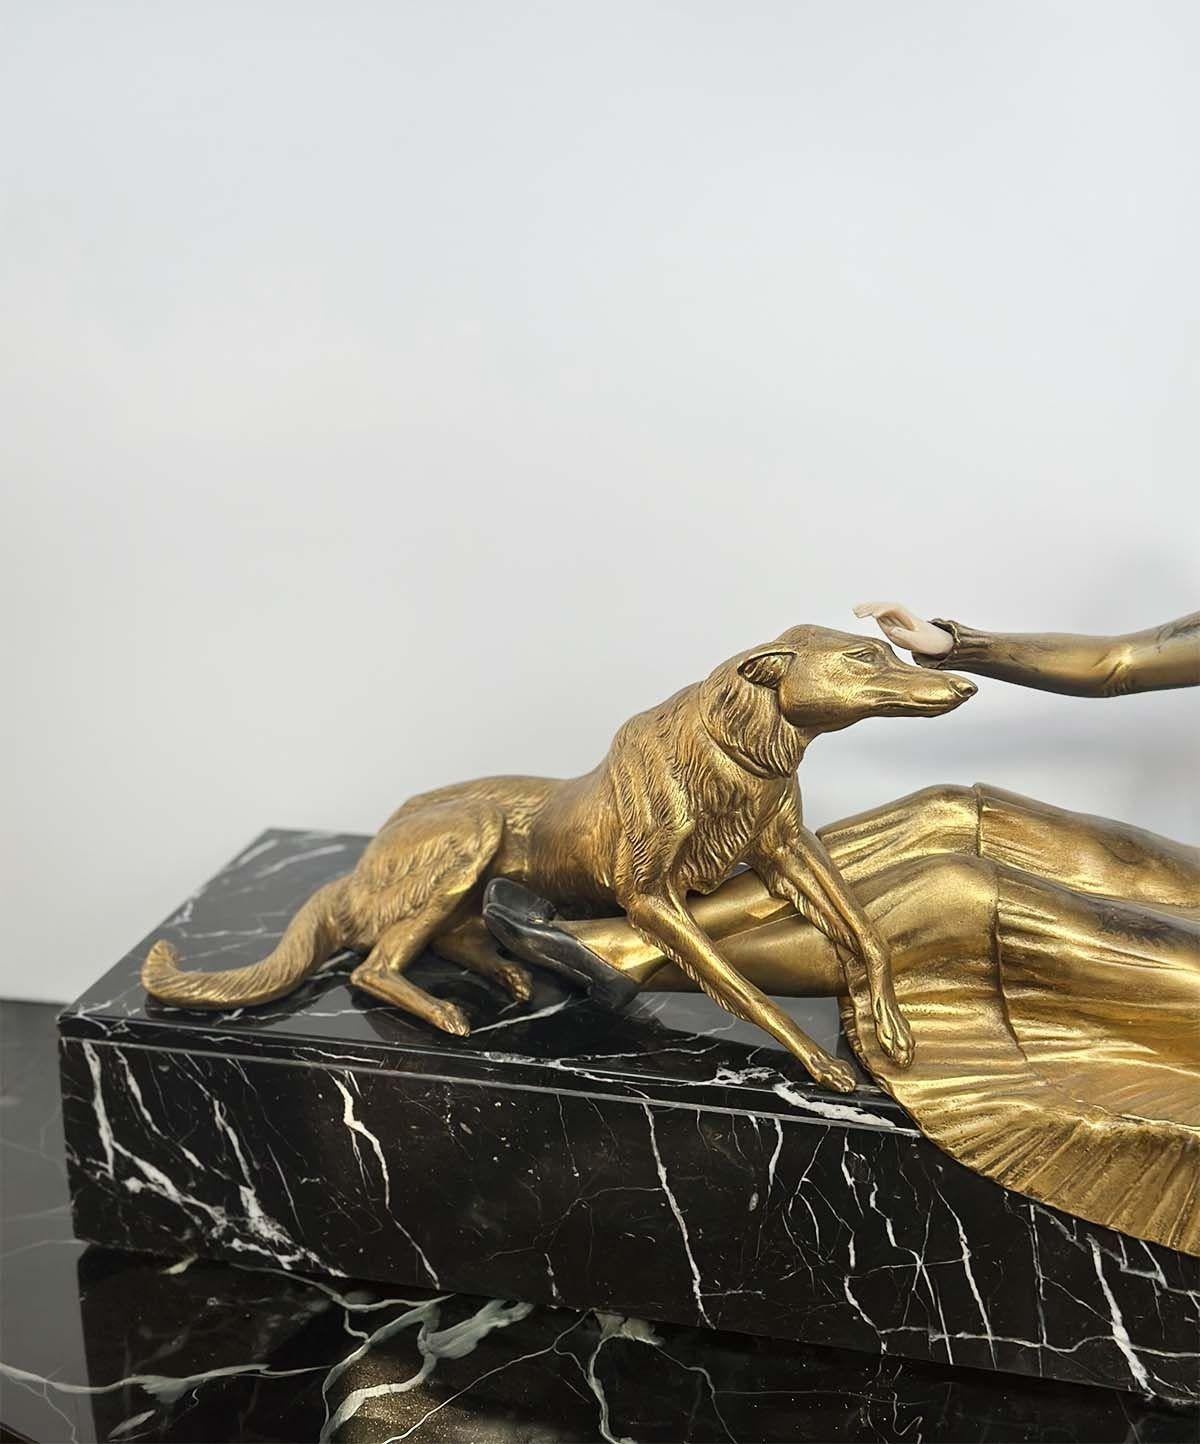 French Art Deco Bronze Patina & Marble Sculpture of Women & Dog by Cham, c. 1920's For Sale